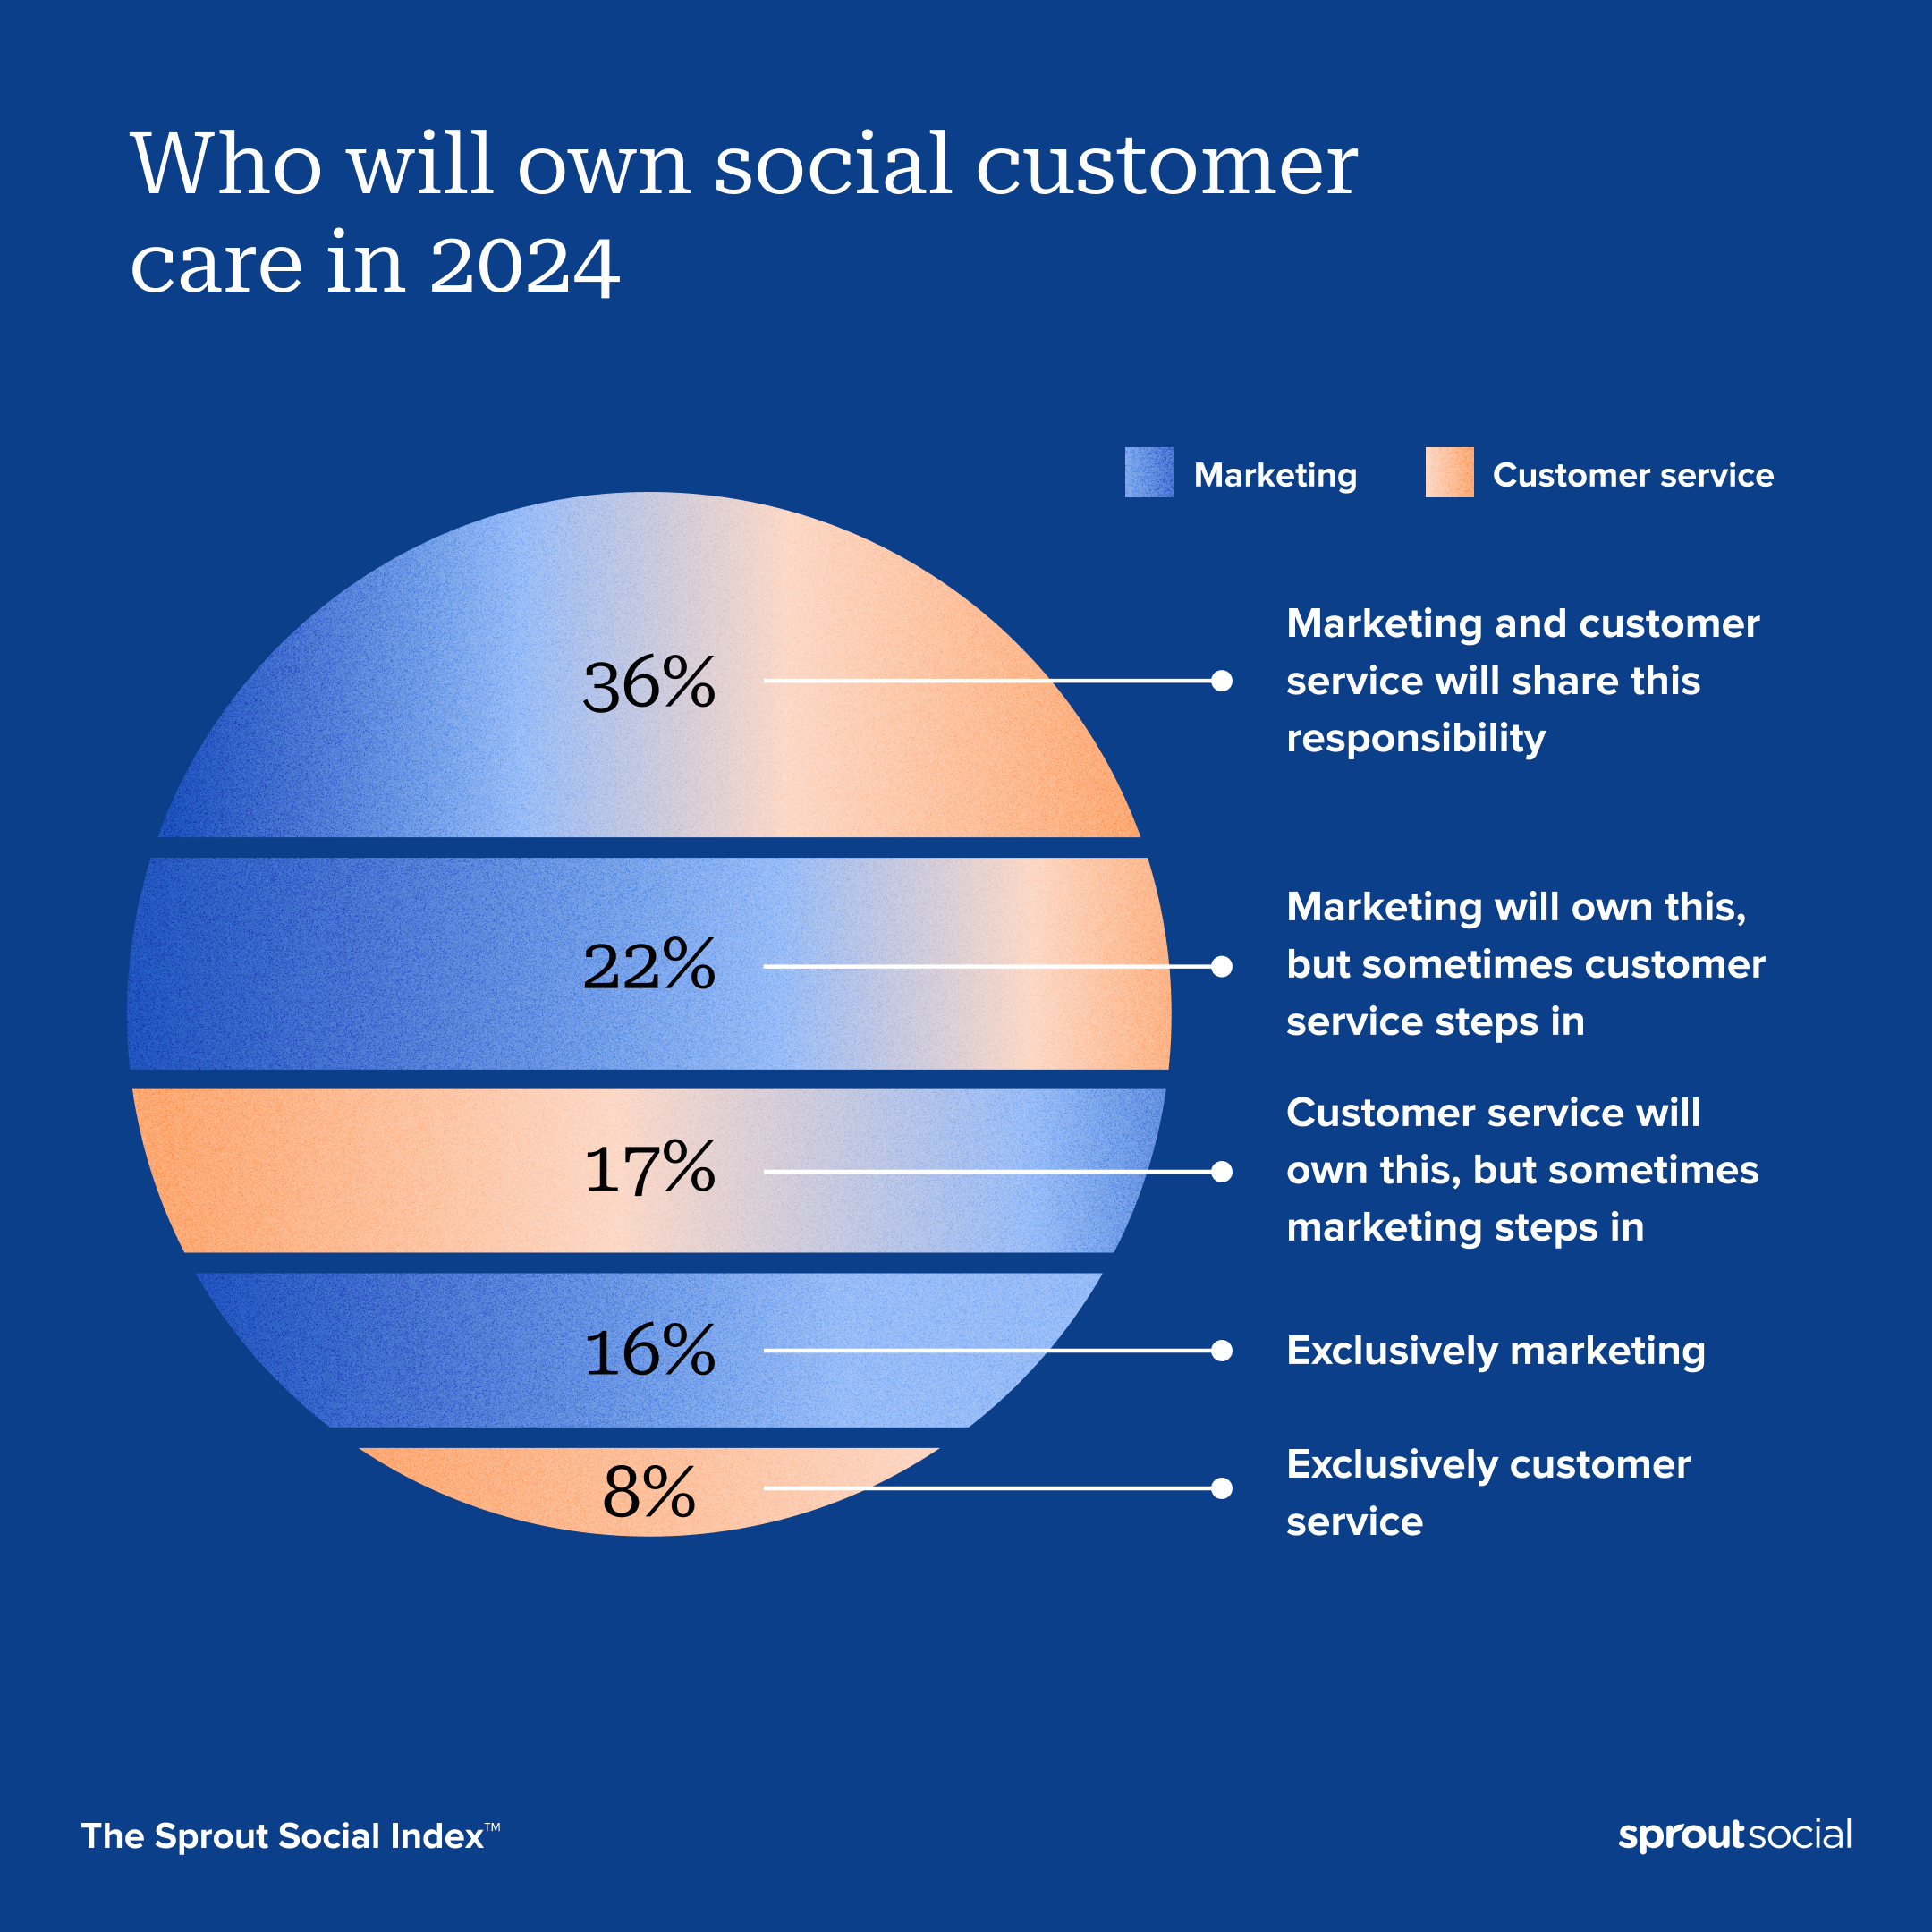 Social customer care is a team sport—are you all in?